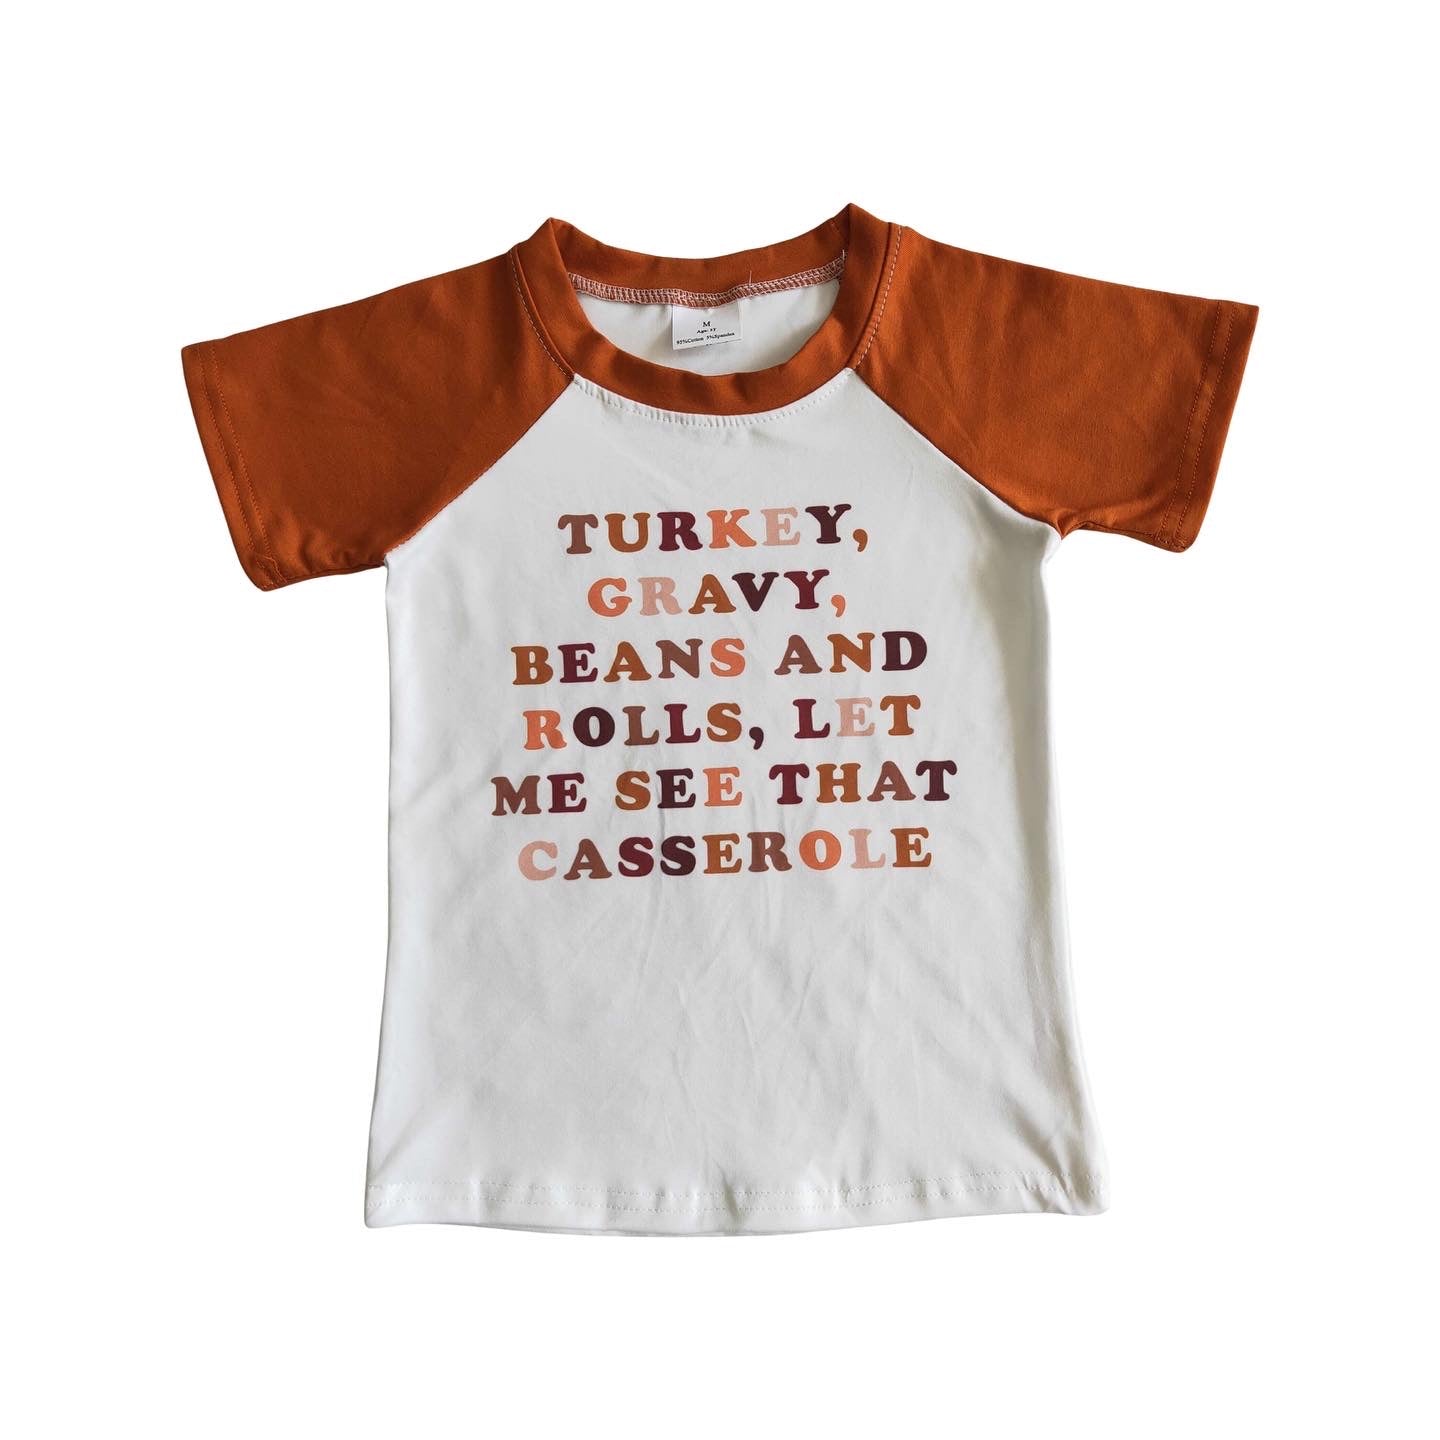 See That Casserole Tee